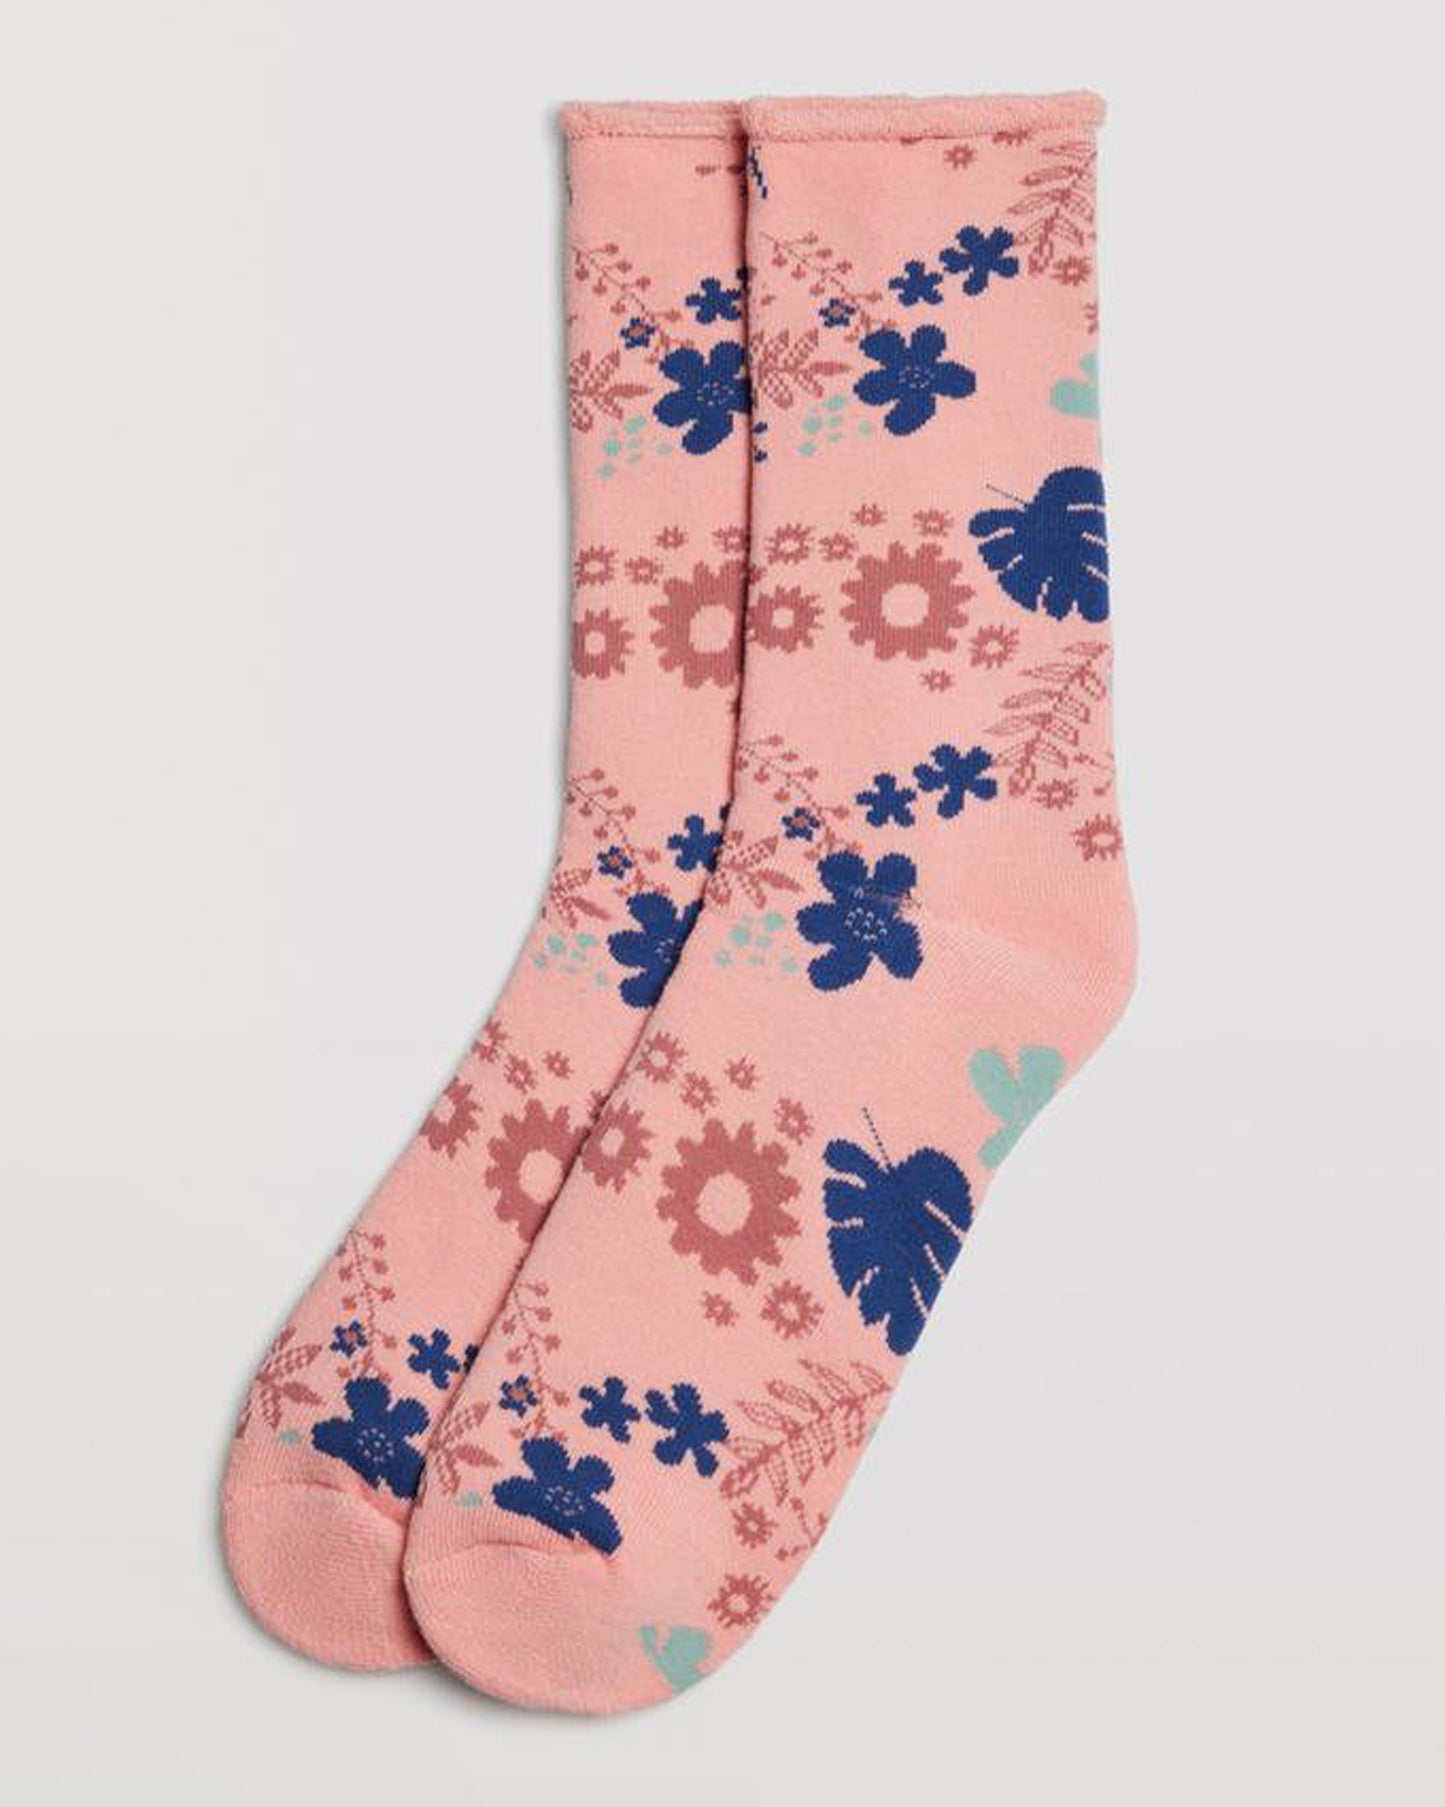 Ysabel Mora 12886 Flower Thermal Socks - Terry lined warm pale pink cotton thermal socks with a floral and leaf pattern in terracotta pink and navy blue, shaped heel and no cuff comfort top.